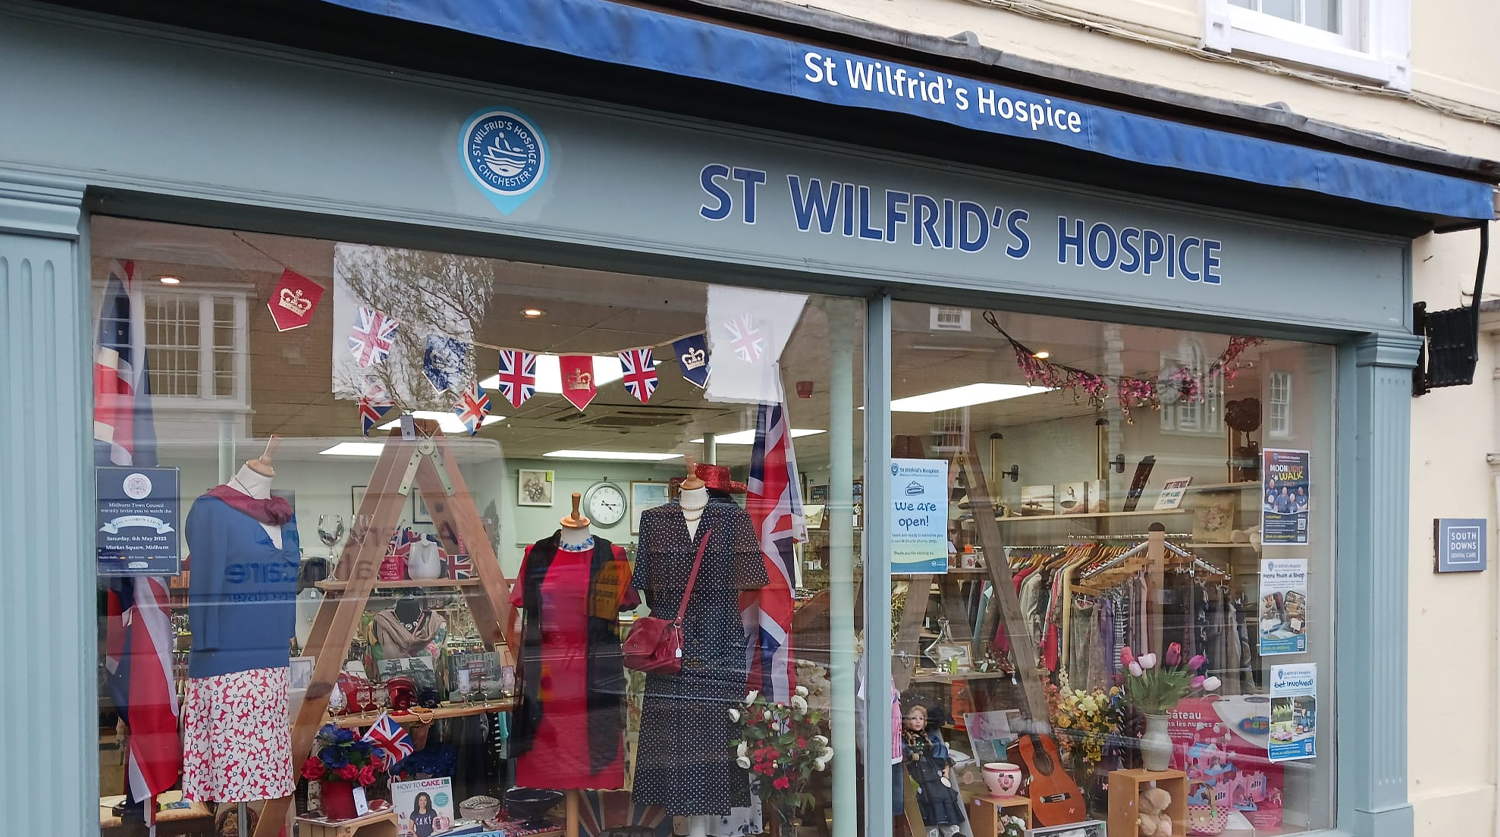 - LISTING PAGE - St Wilfrid's Hospice